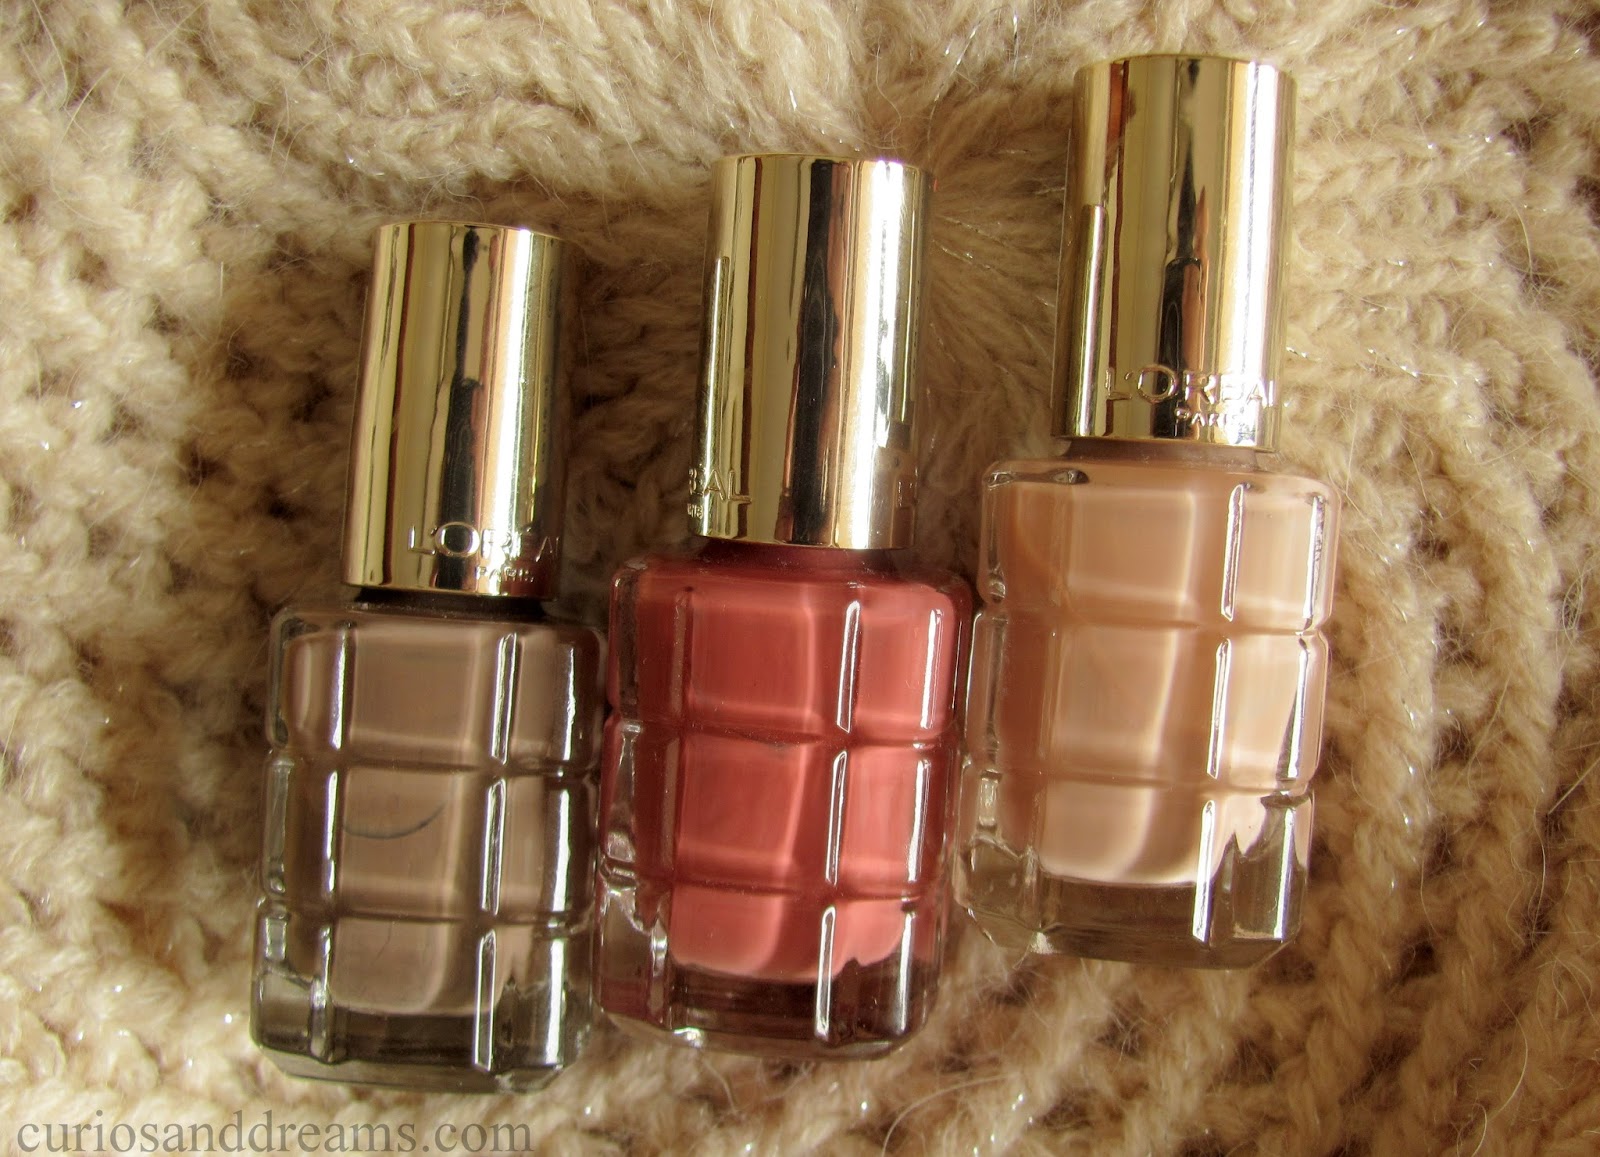 L'Oreal Color Riche A L'Huile Nail Varnish, Rose Ballet, Moka Chic & Cafe  De Nuit : Review & Swatches! - Curios and Dreams - Indian Skincare and  Beauty